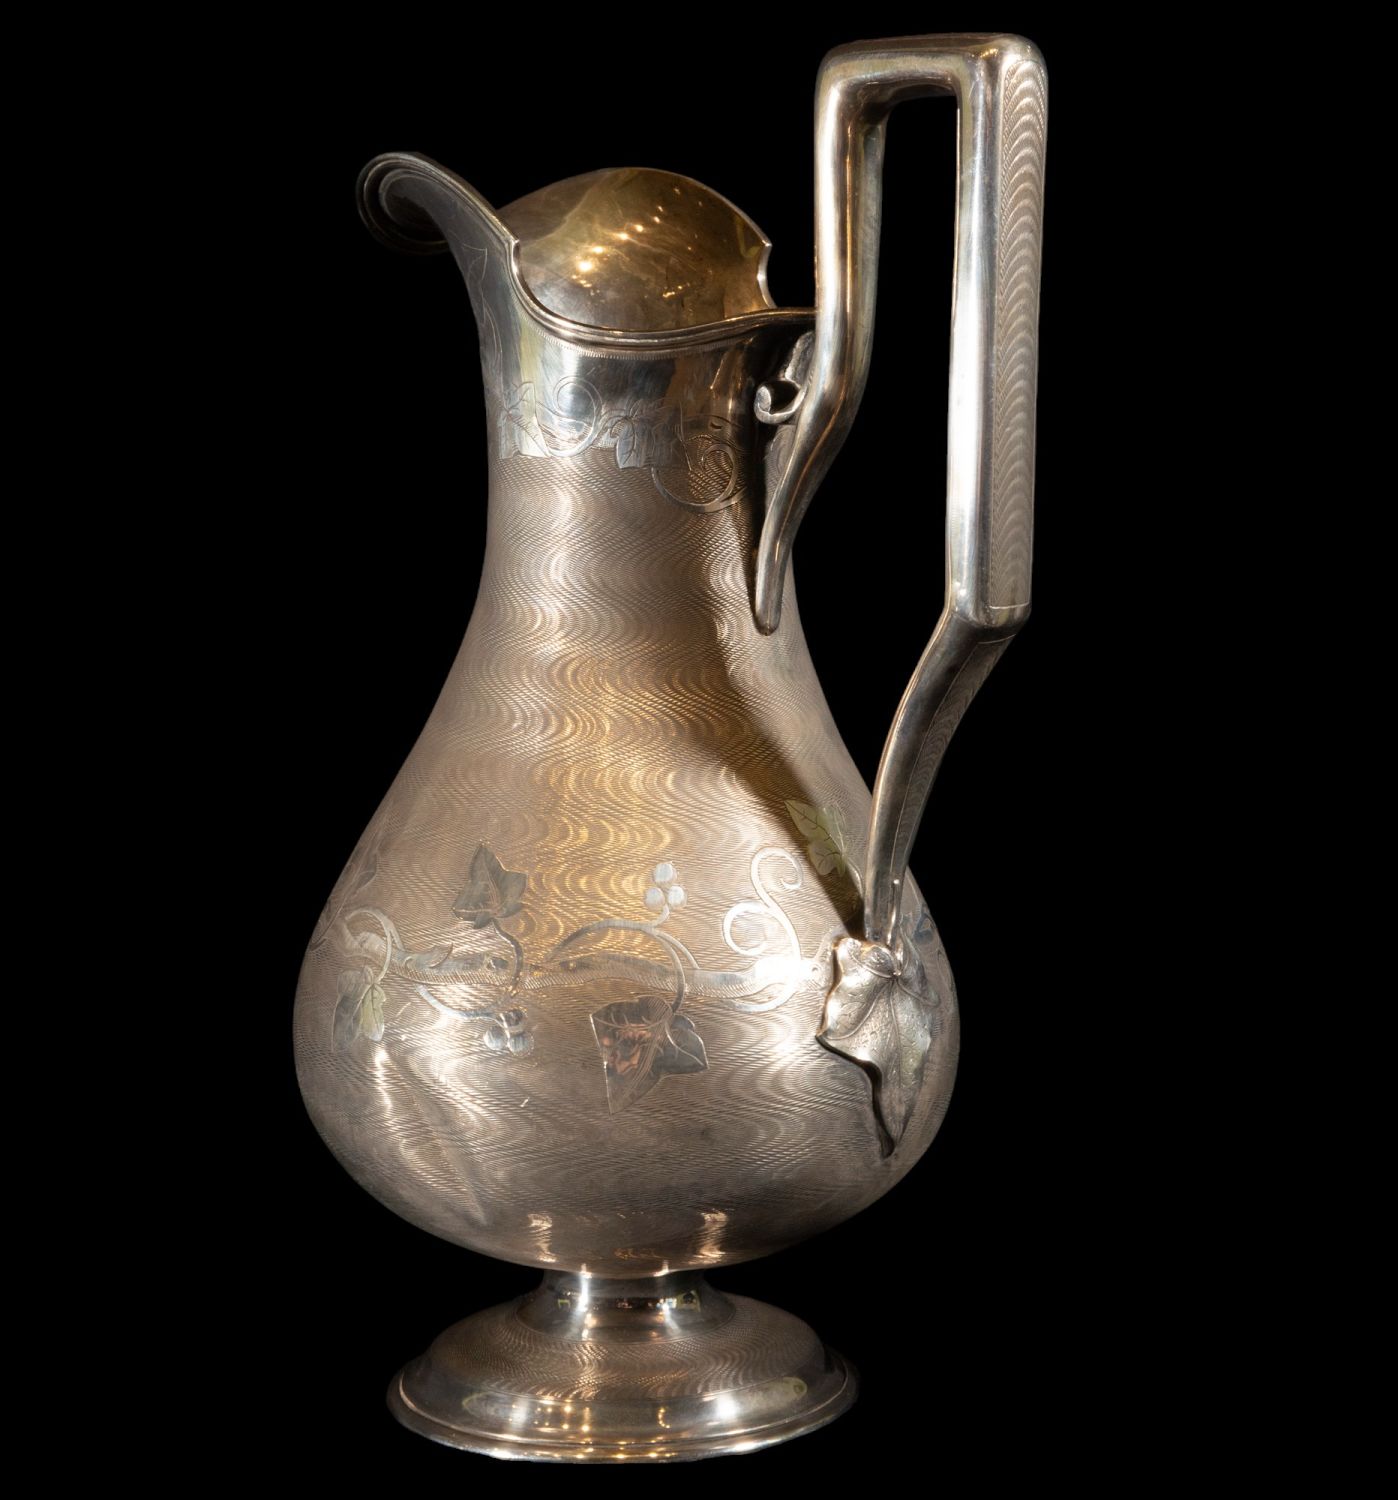 Large French Jug in sterling silver with Underplate, 19th century, 2.2 kg, in sterling silver - Image 7 of 7